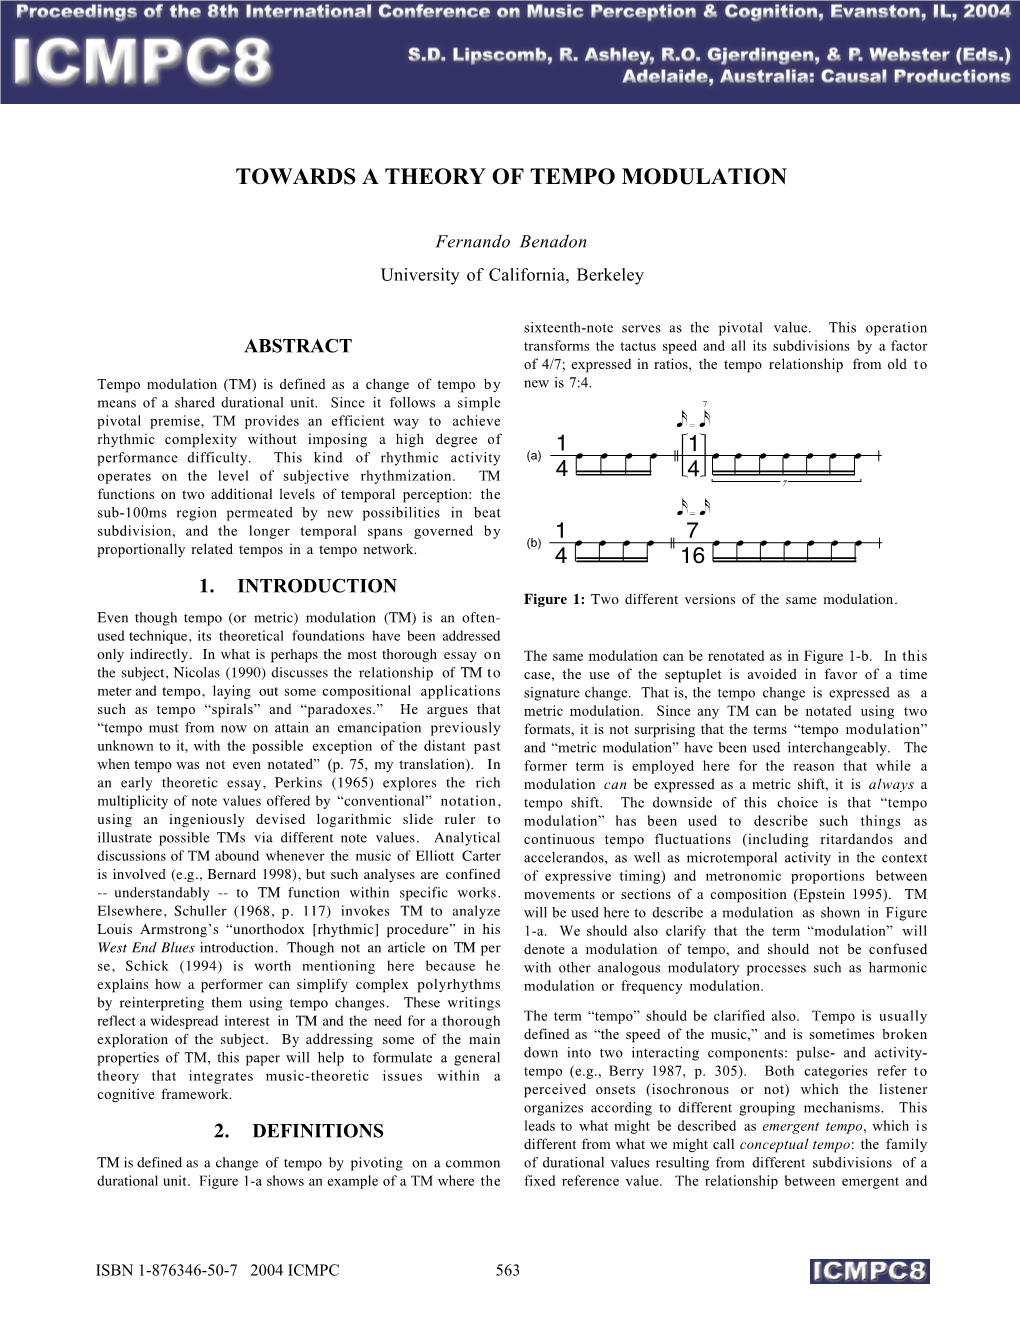 Towards a Theory of Tempo Modulation